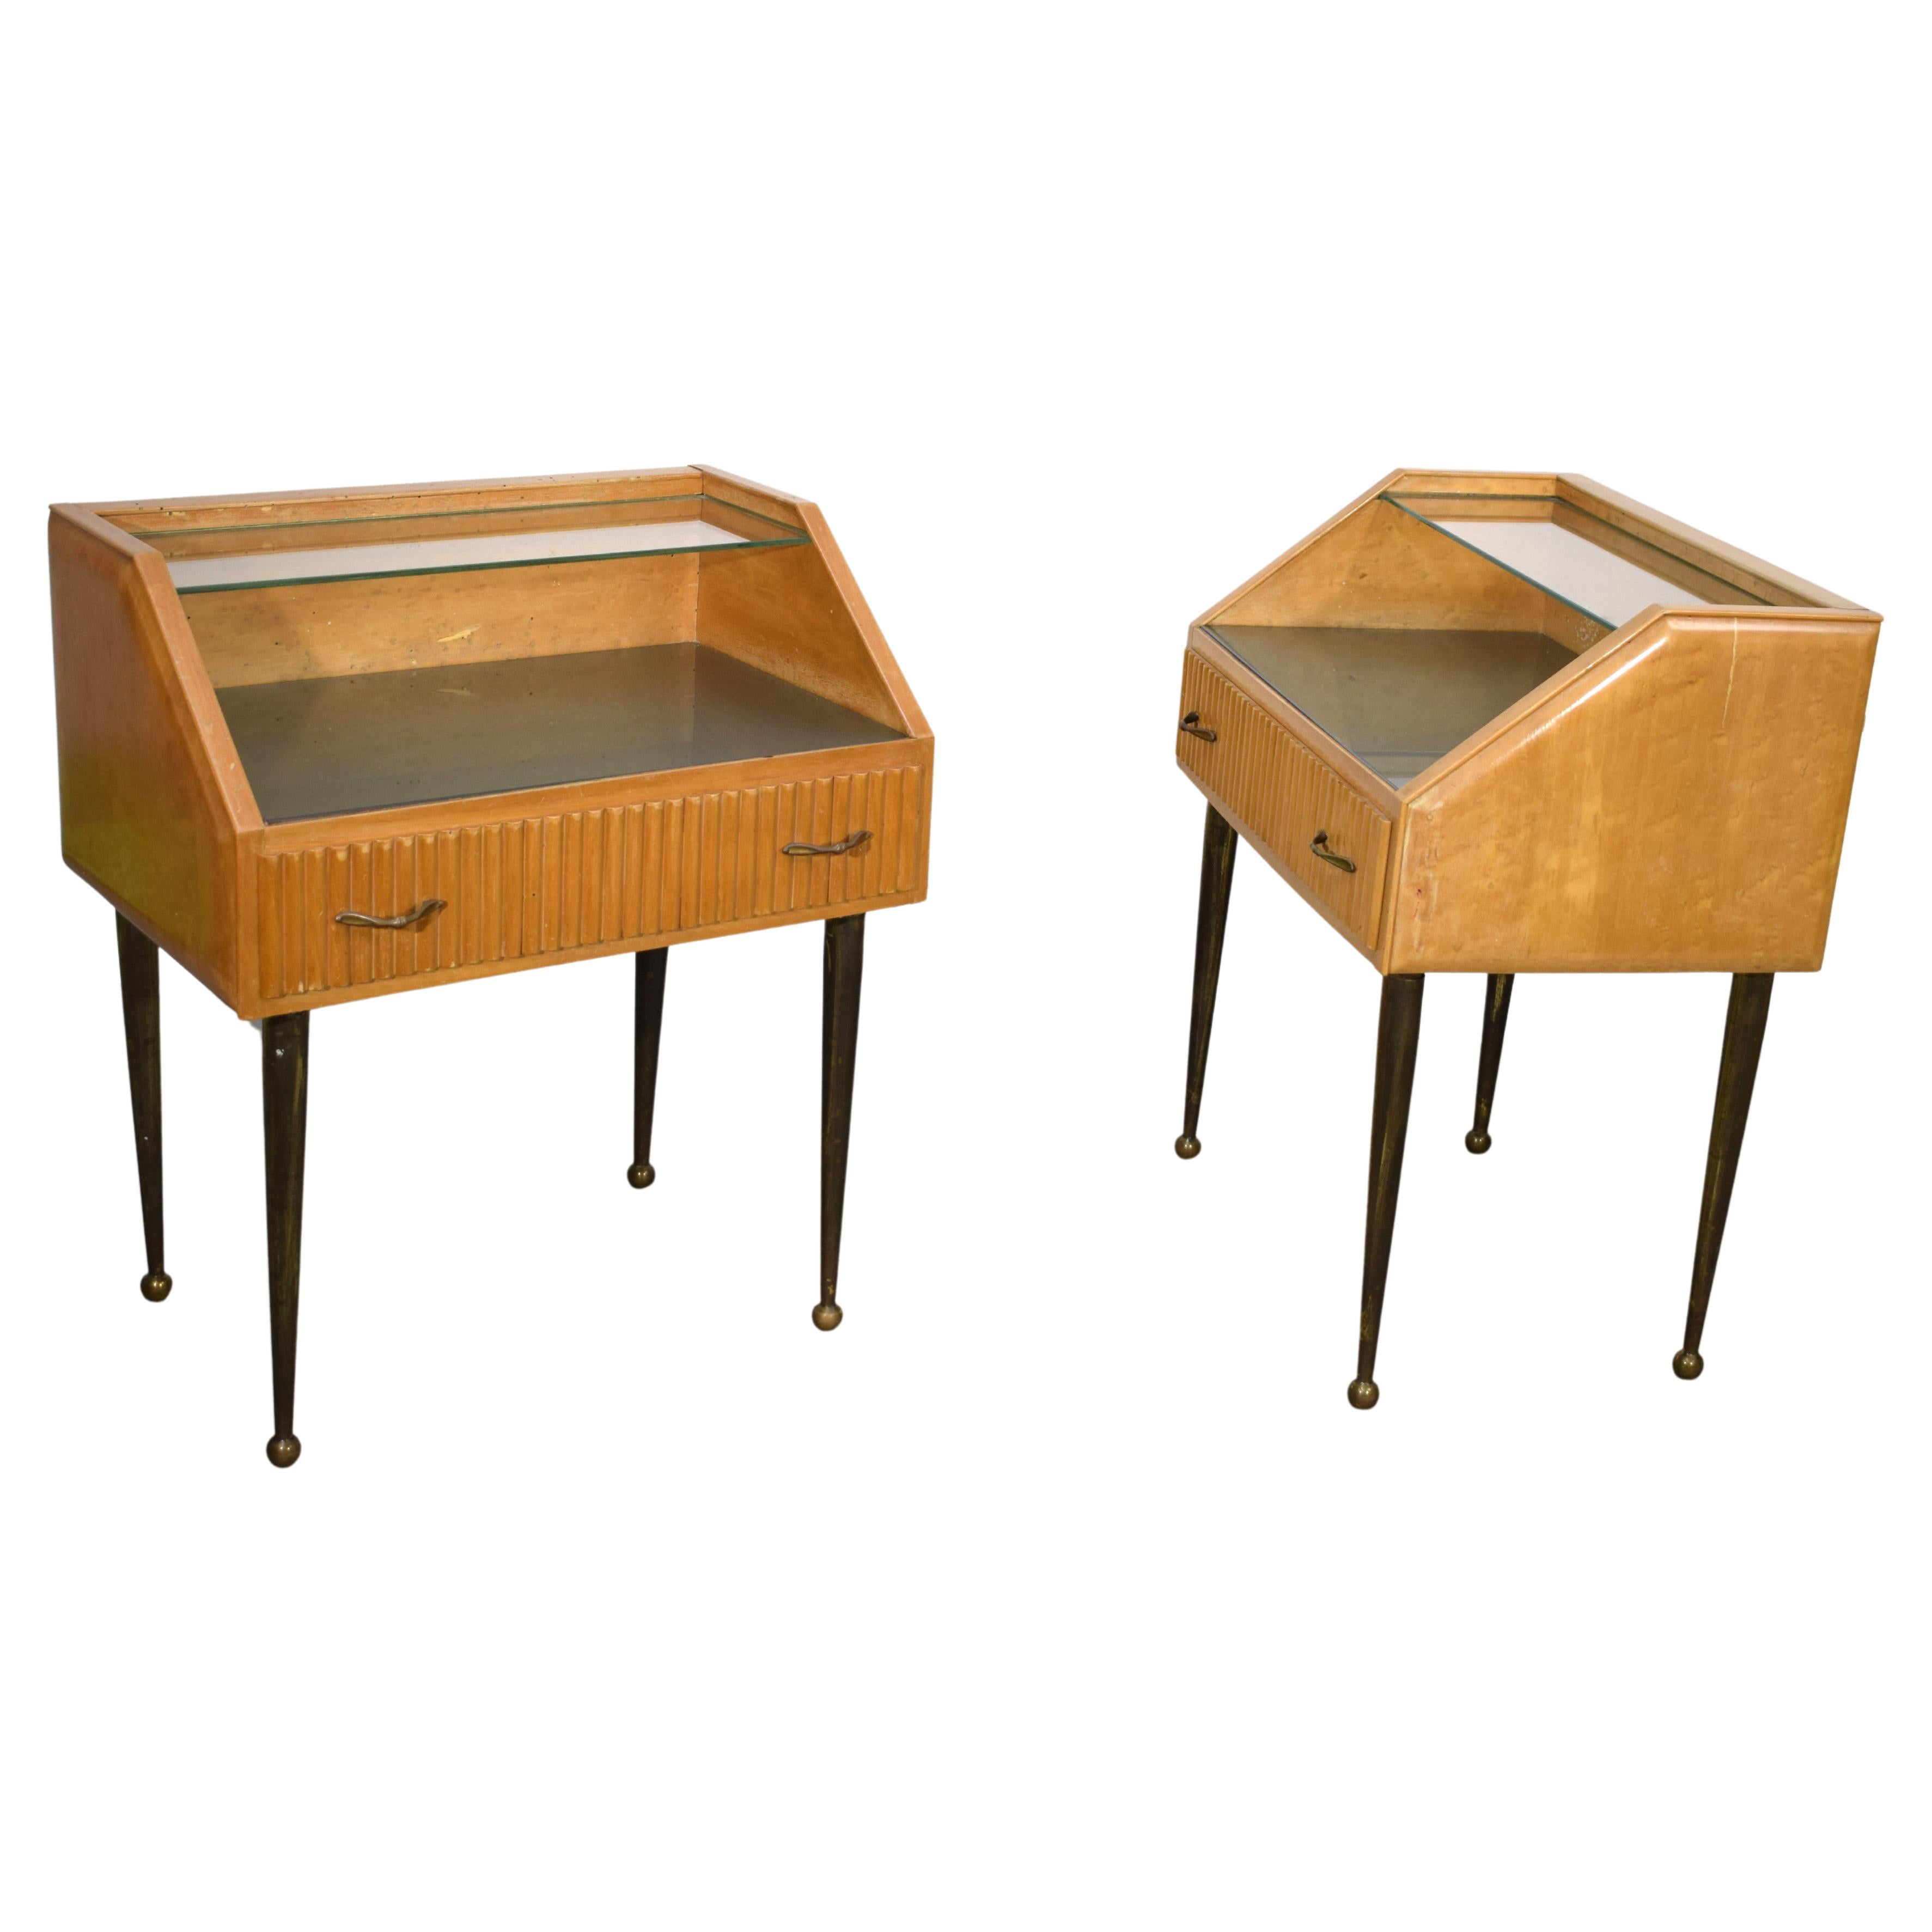 Pair of Italian nightstands, wood, brass and glass, 1950s